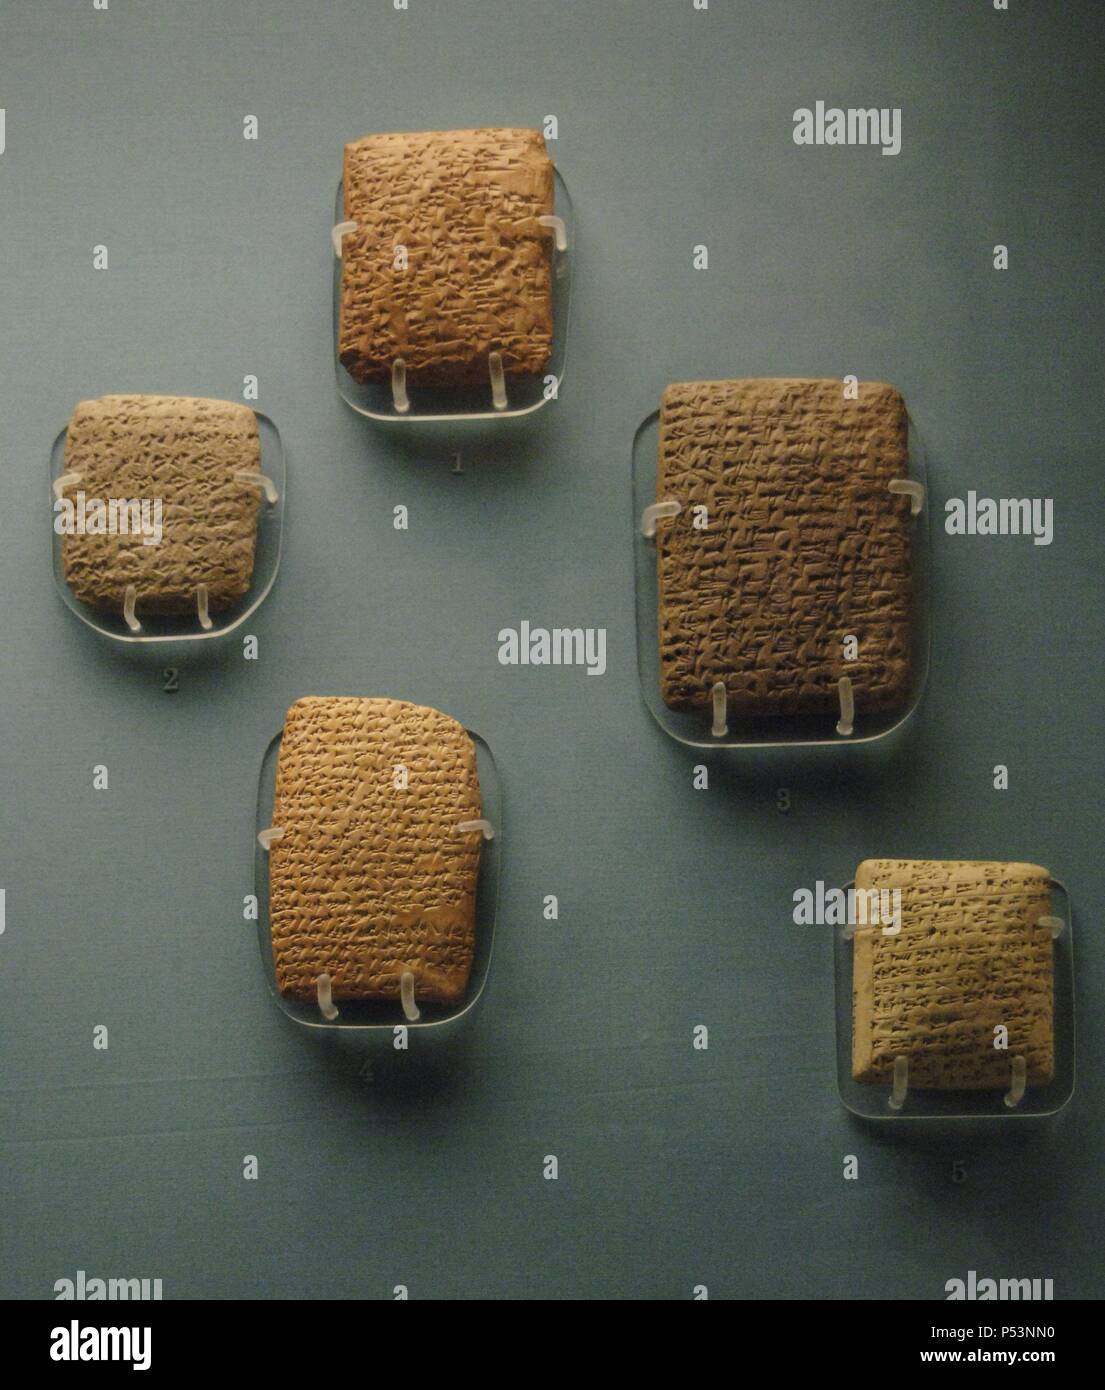 Amarna Letters. 14th century BC. Clay tablets with cuneiform script, mostly written in Akkadian. Designate a file of correspondence, mostly diplomatic, between the Egyptian administration and its representatives in Canaan and Amurru. 1350-1330 BC. From Amarna (Upper Egypt). British Museum. London. United Kingdom. Stock Photo